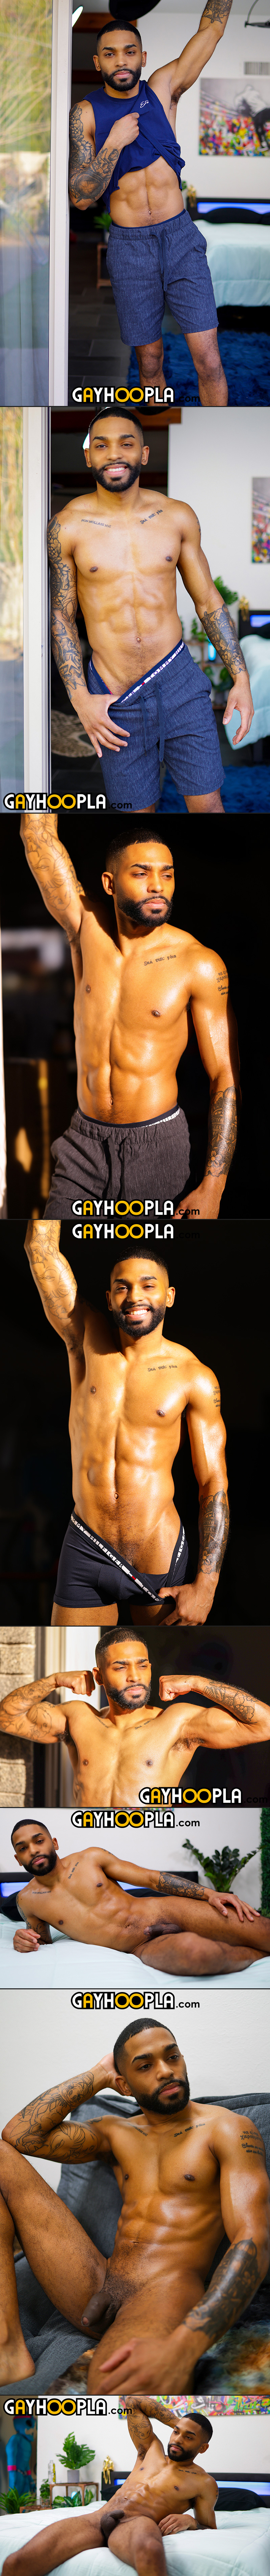 Tatted Stud James Harp Does The Stroke ‘N Poke For The Cameras! at GayHoopla